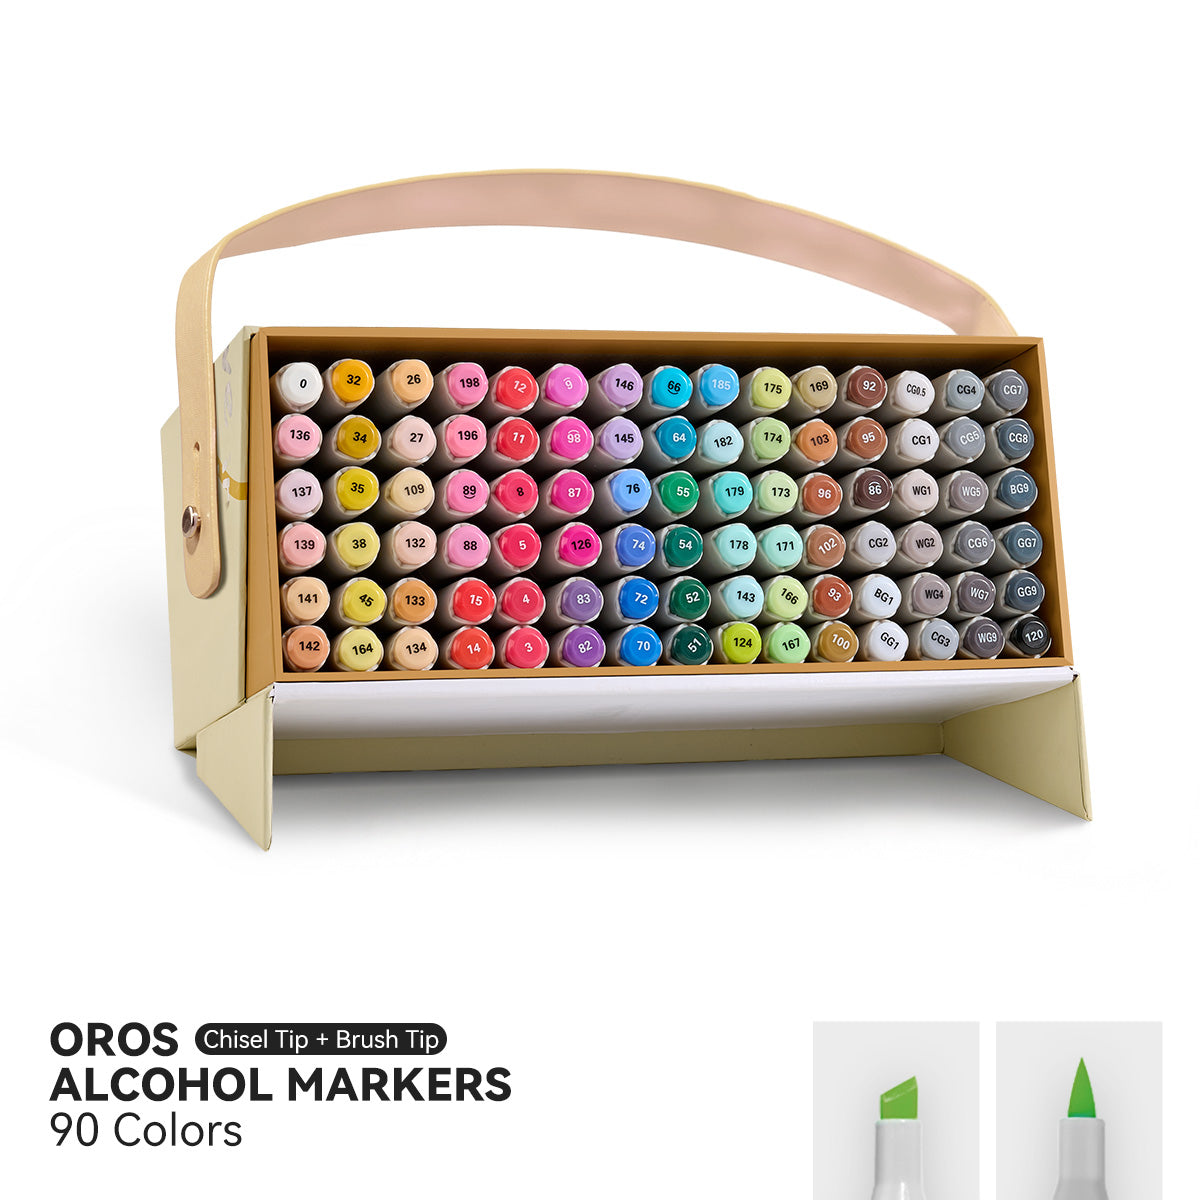 Arrtx OROS 90 Colors Alcohol Markers